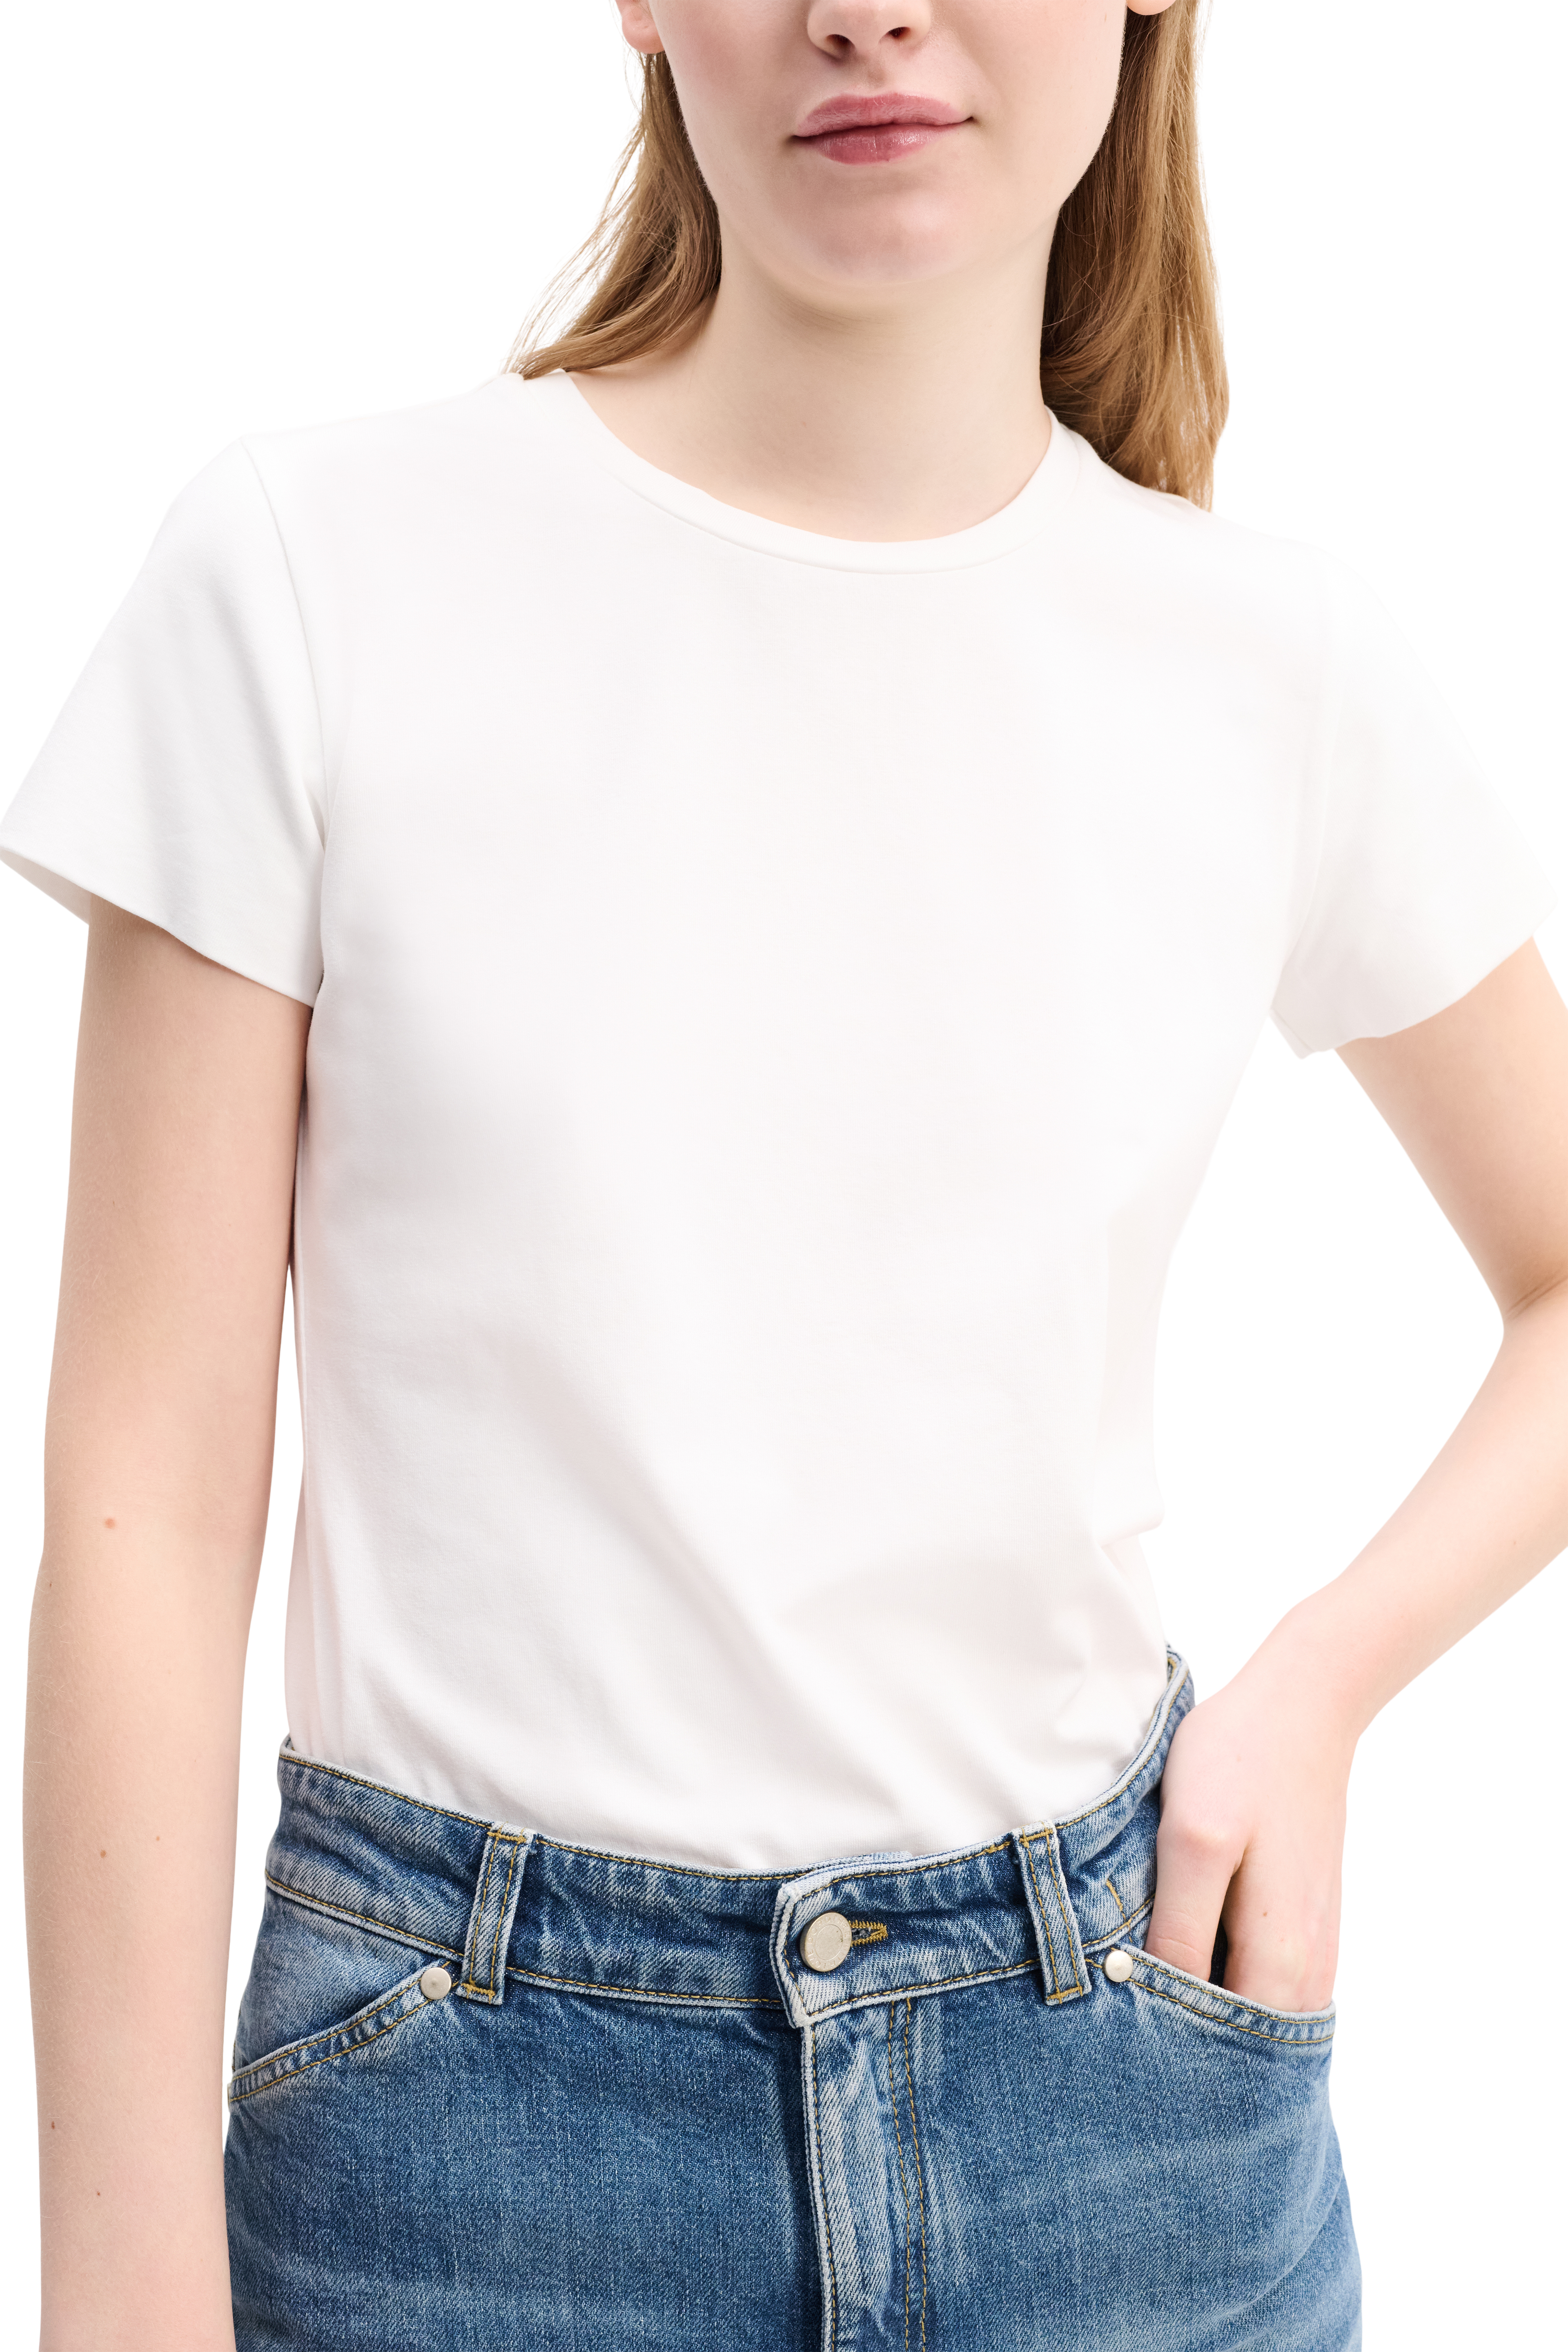 BASIC T-SHIRT IN COTTON JERSEY Basic on sale 2022 7